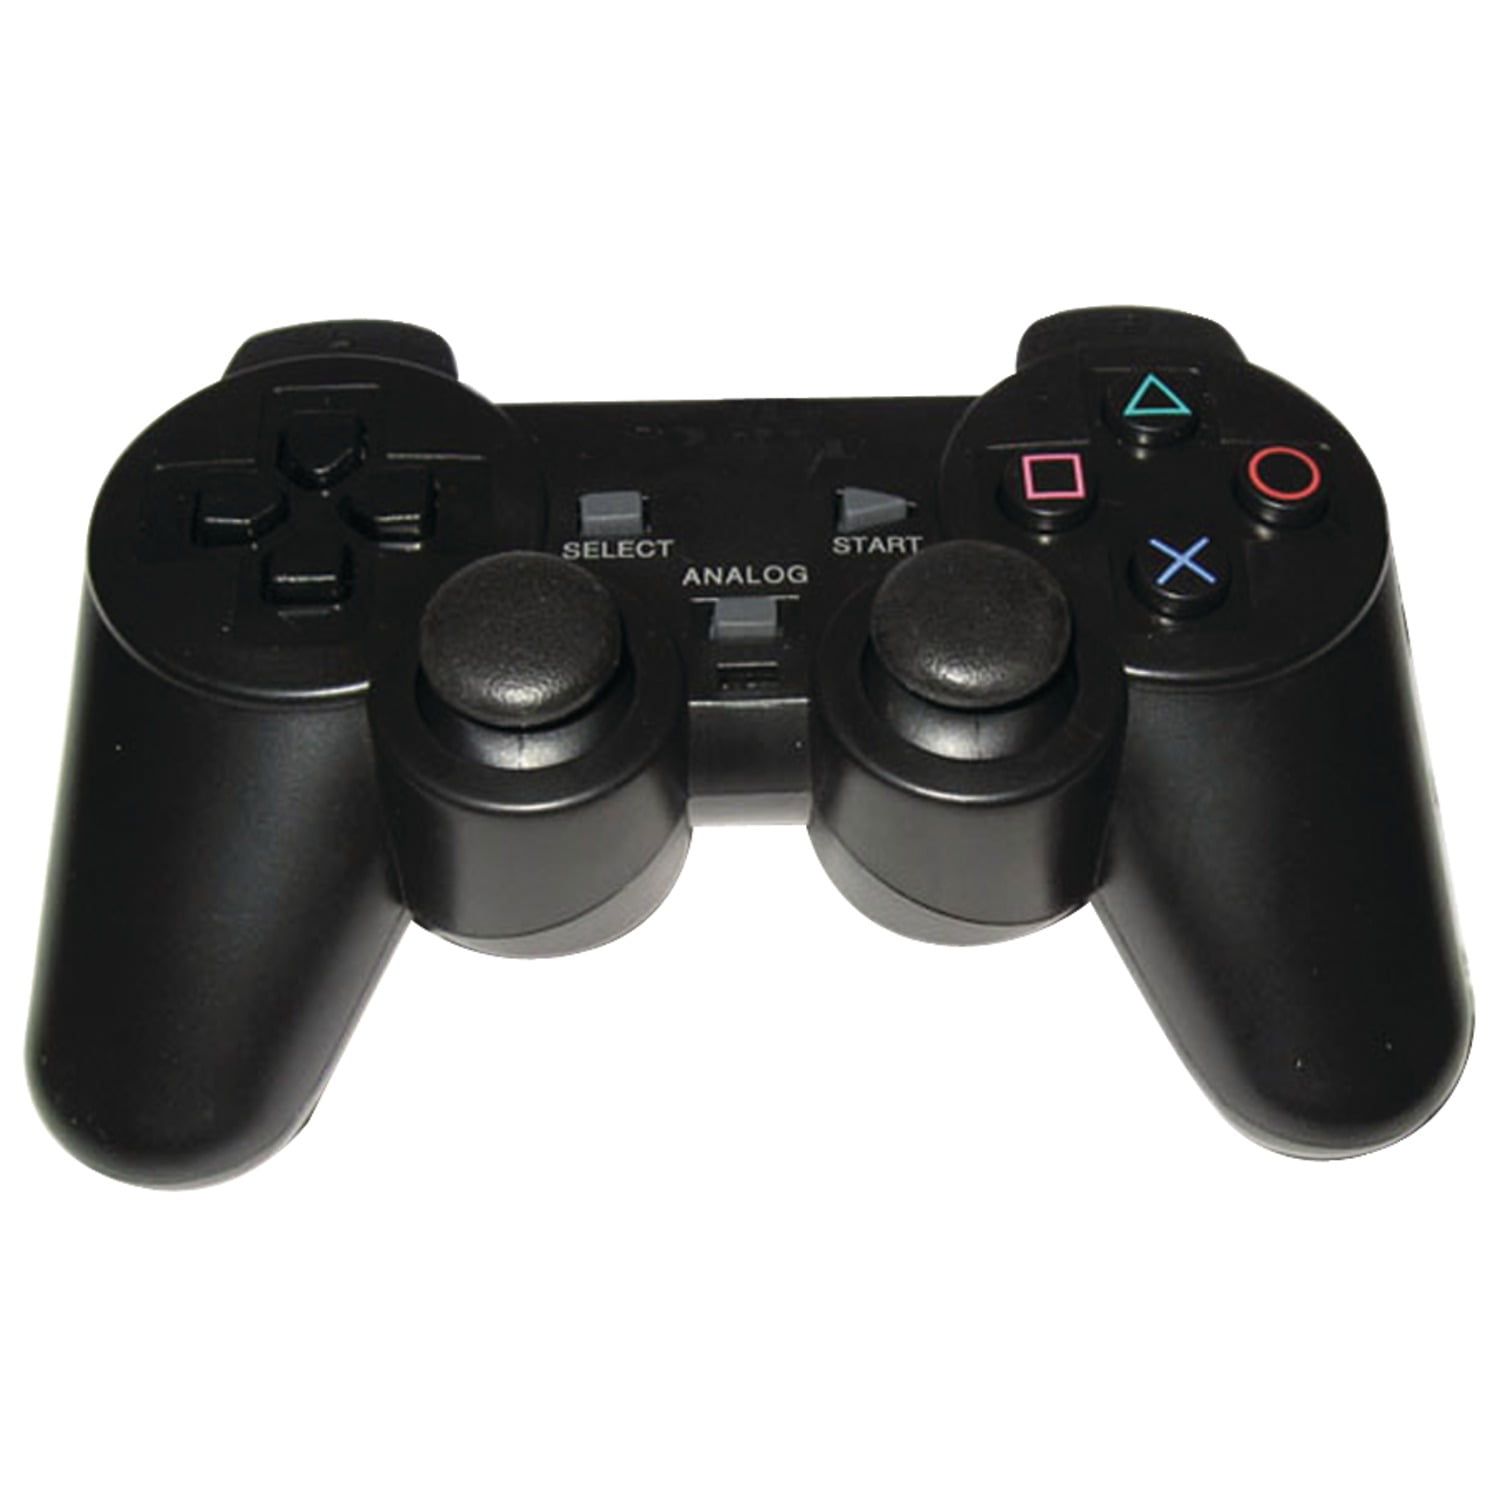 can you use dualshock 2 on ps3